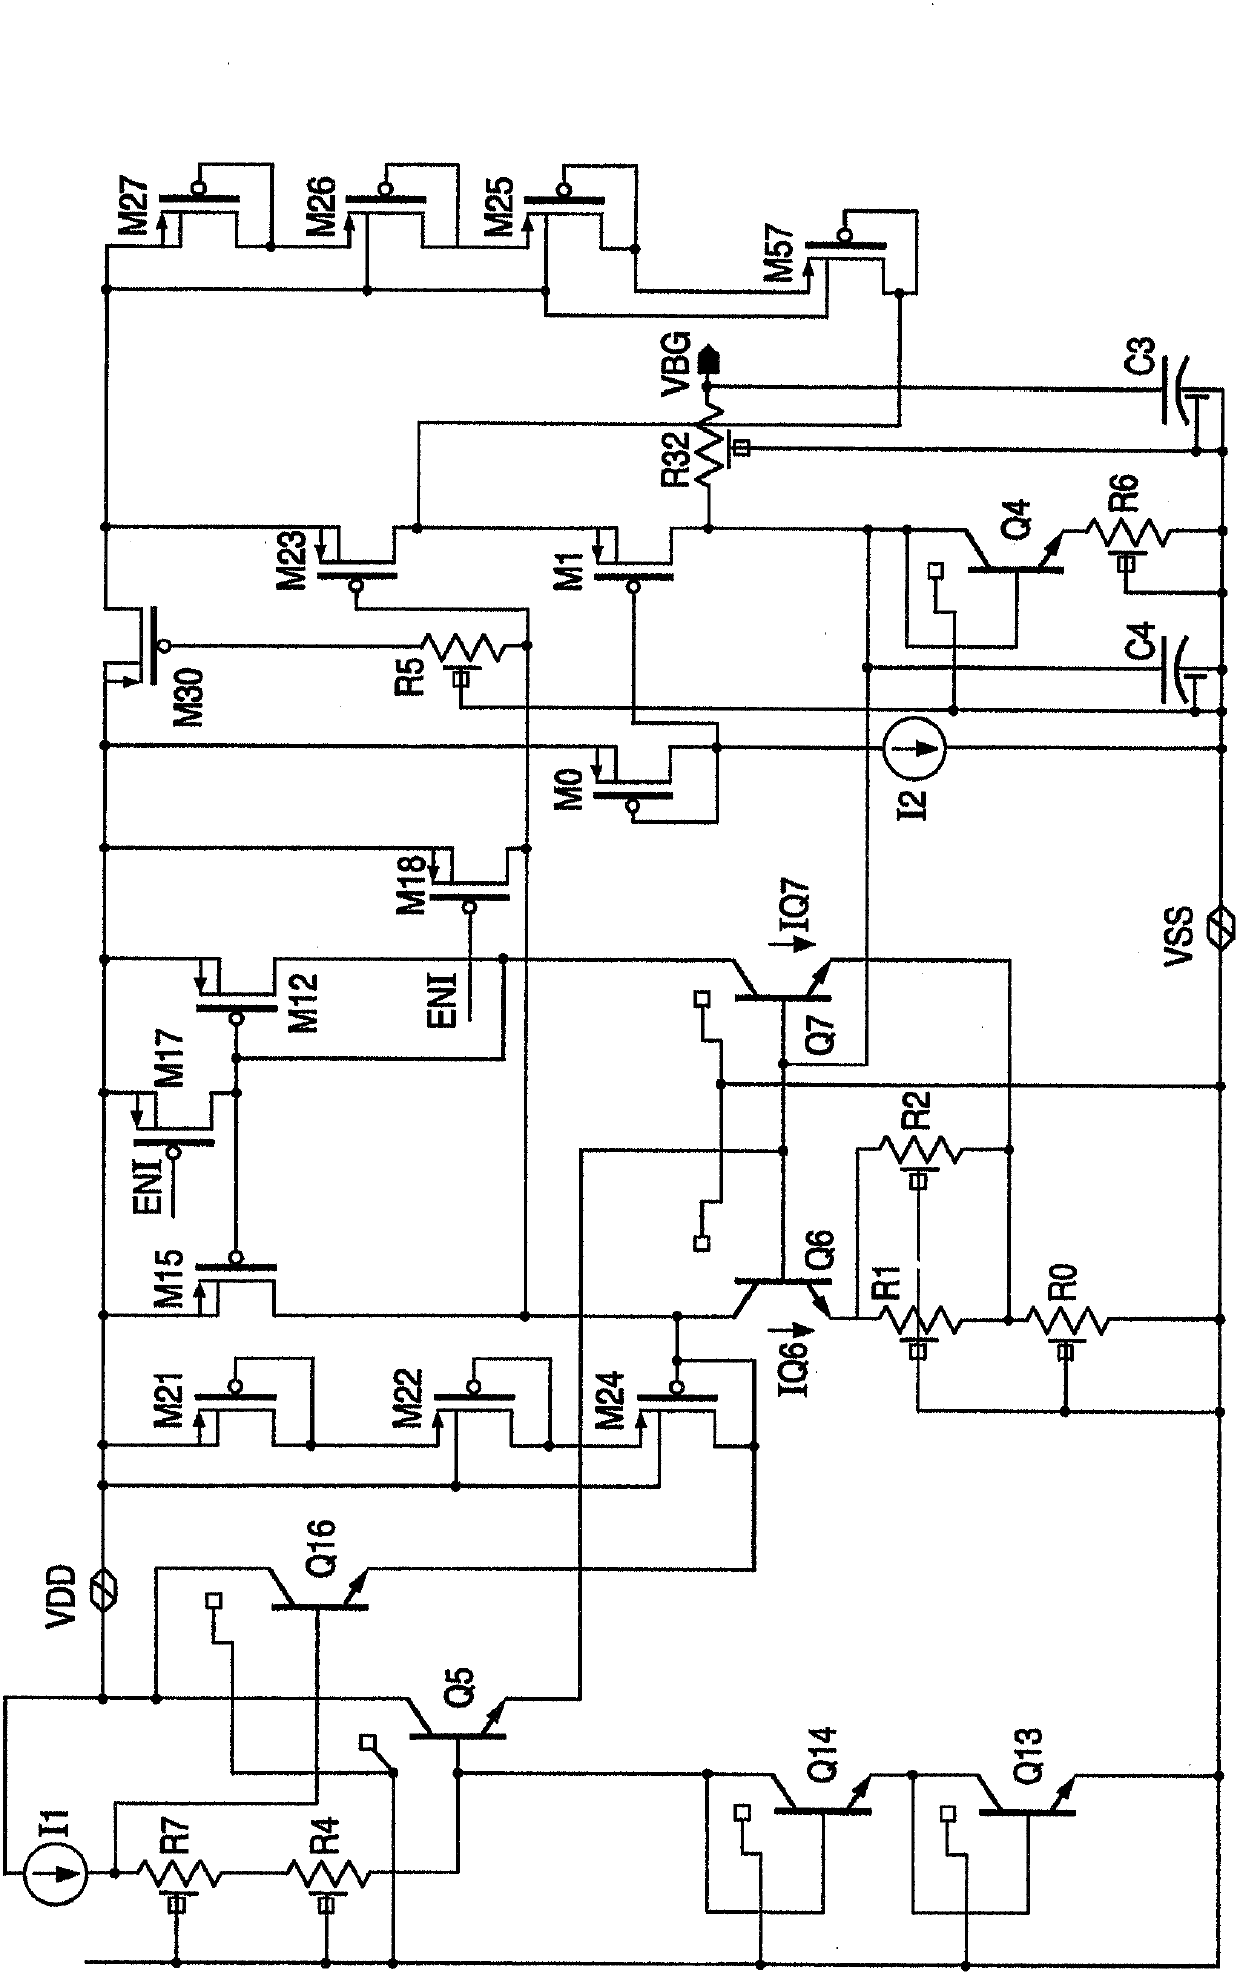 Bandgap voltage reference circuitry